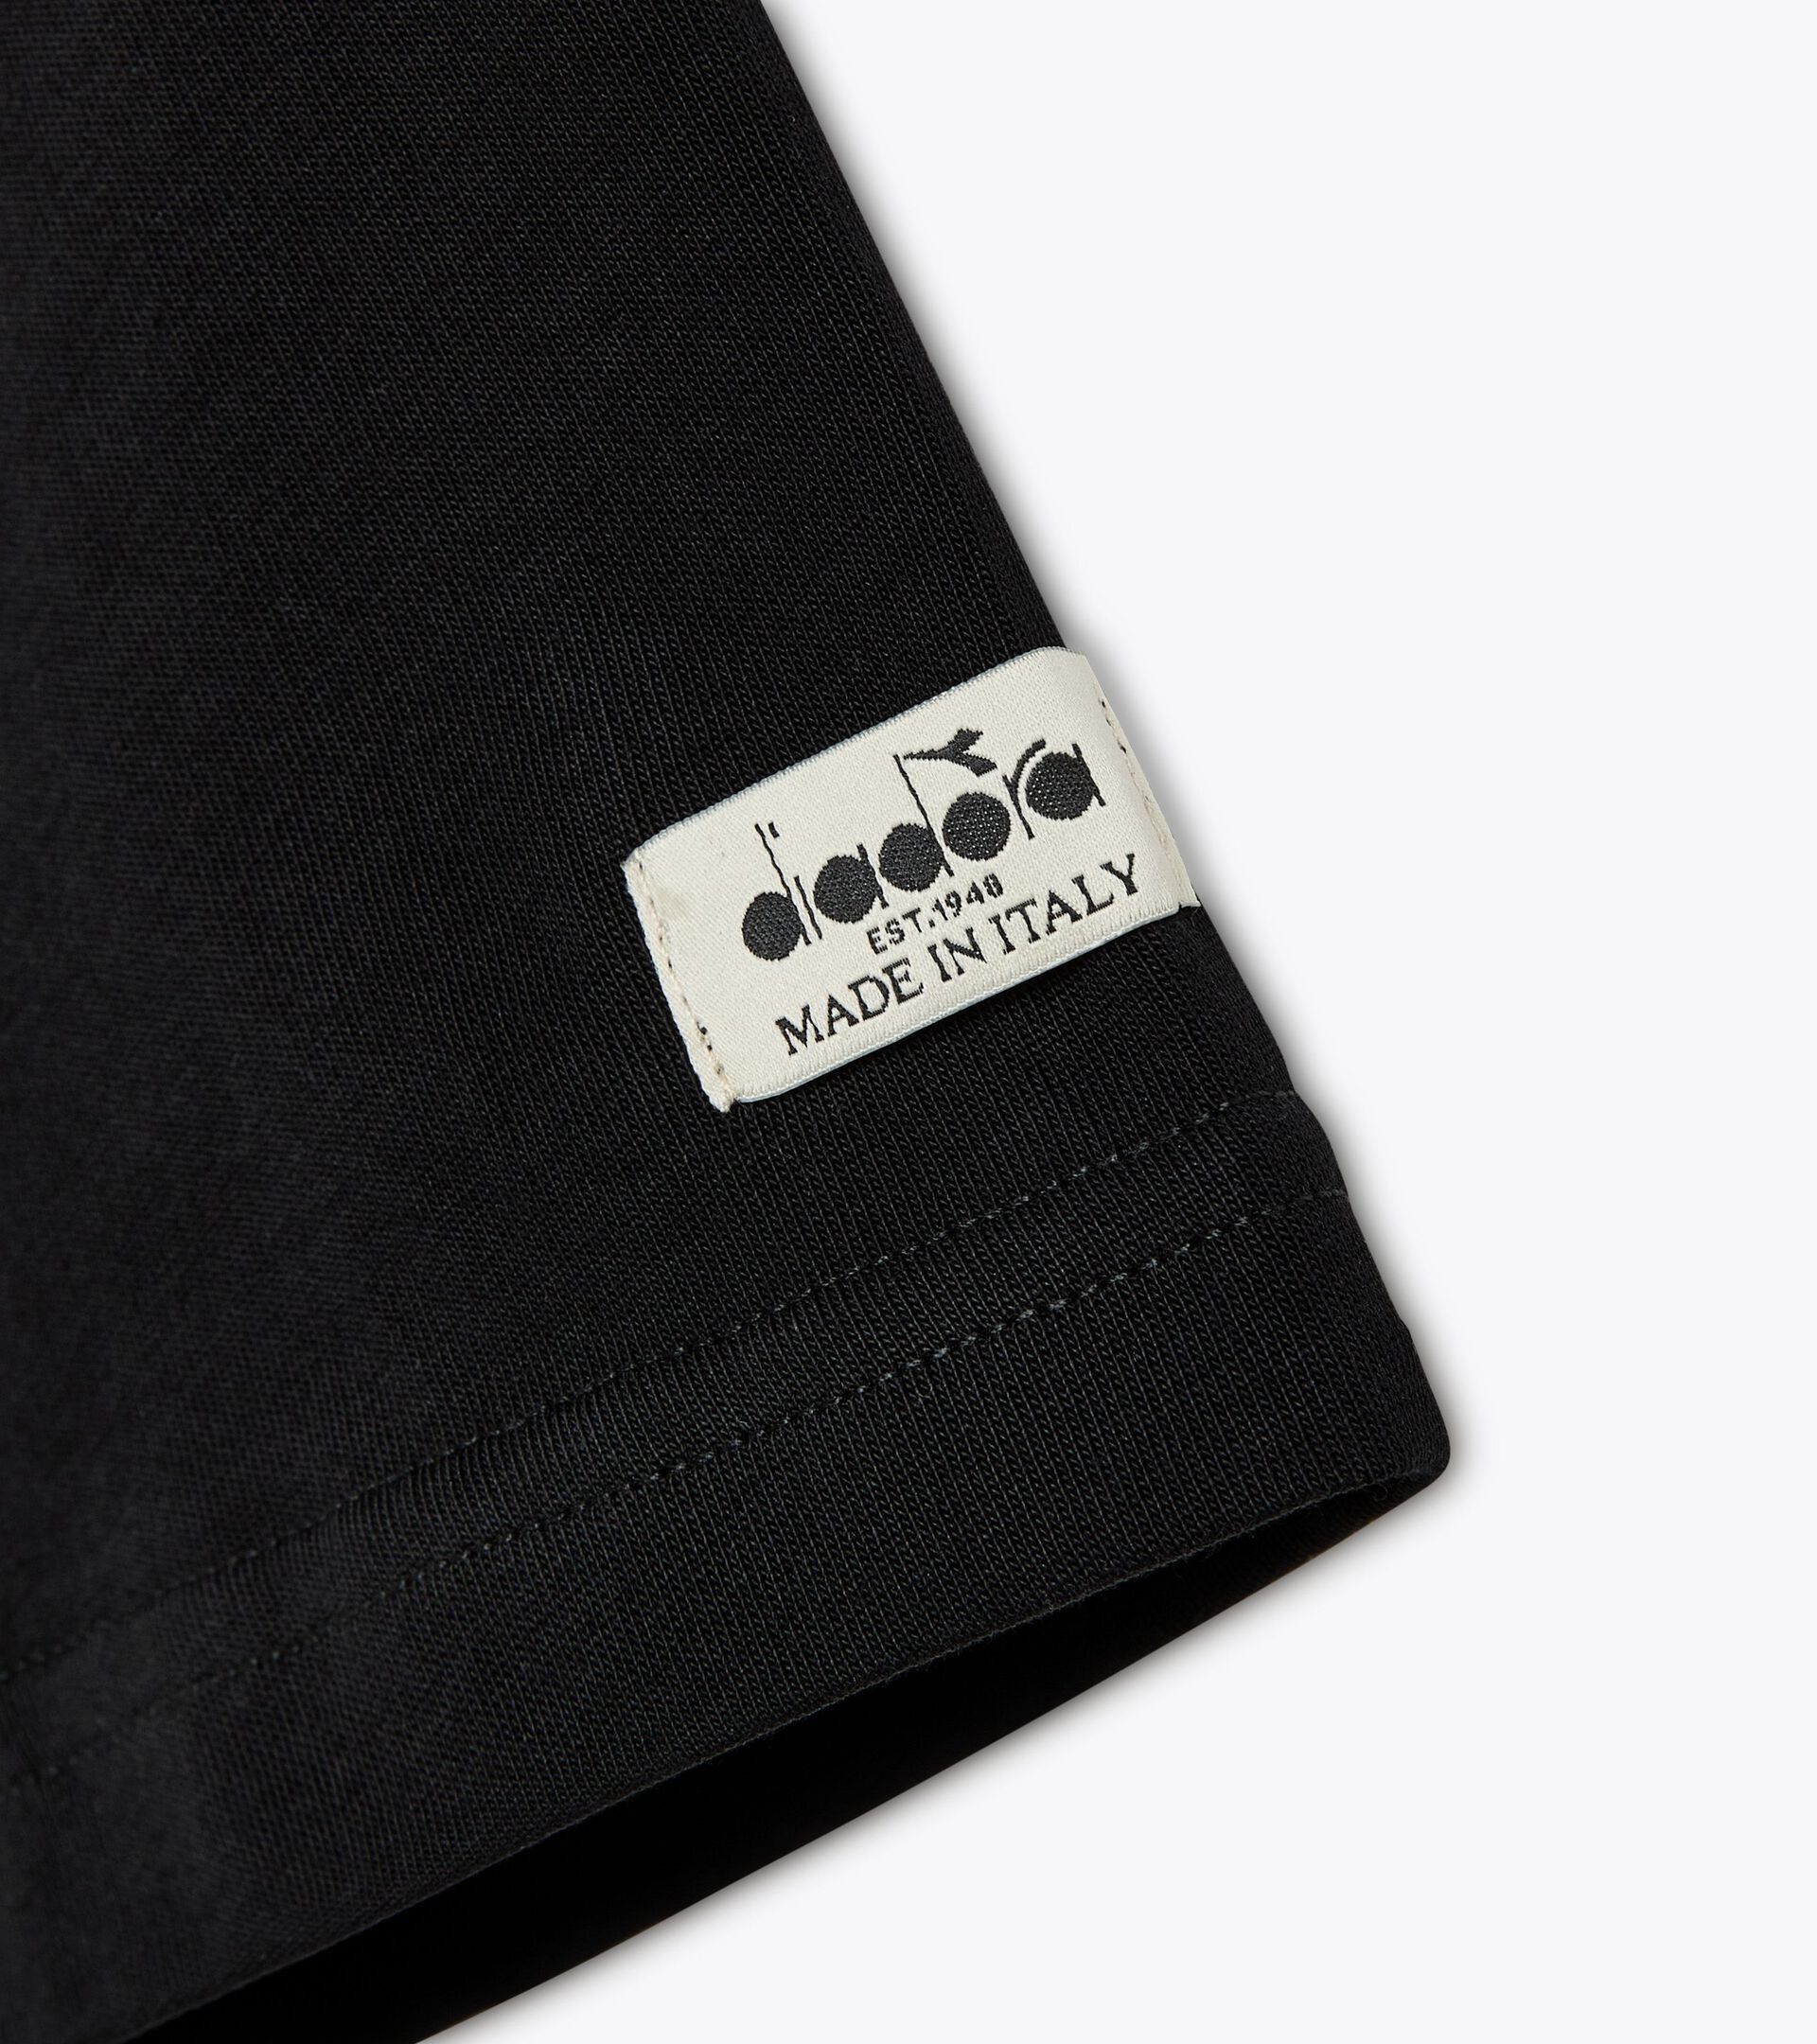 50% recycled cotton t-shirt - Made in Italy - Gender Neutral  T-SHIRT SS LEGACY BLACK - Diadora